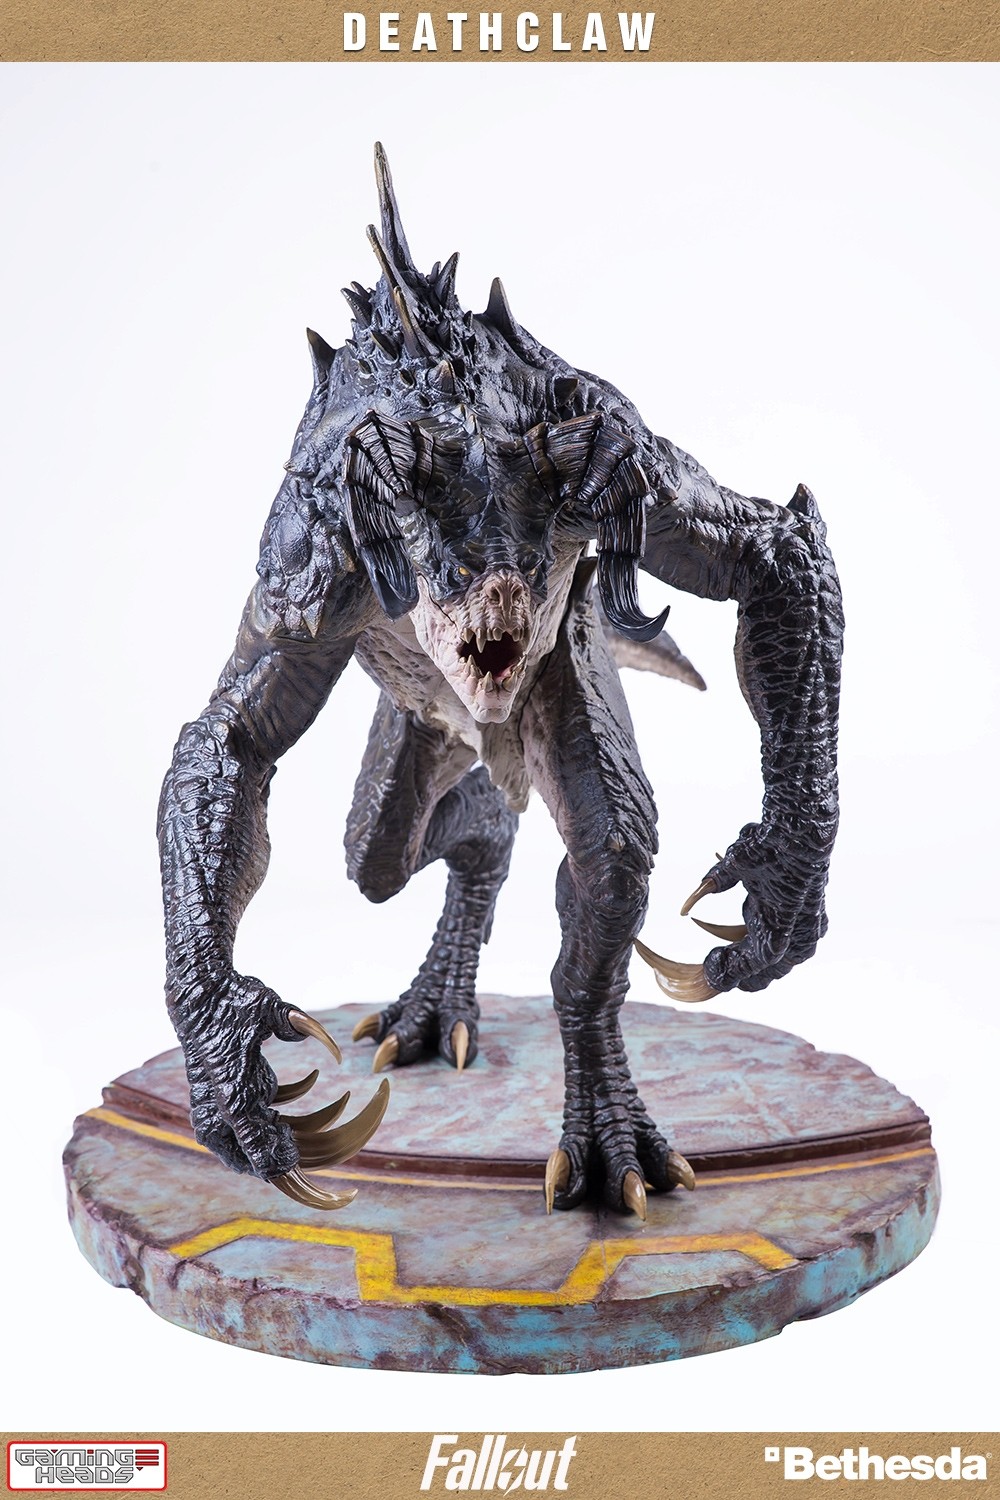 fallout deathclaw figure